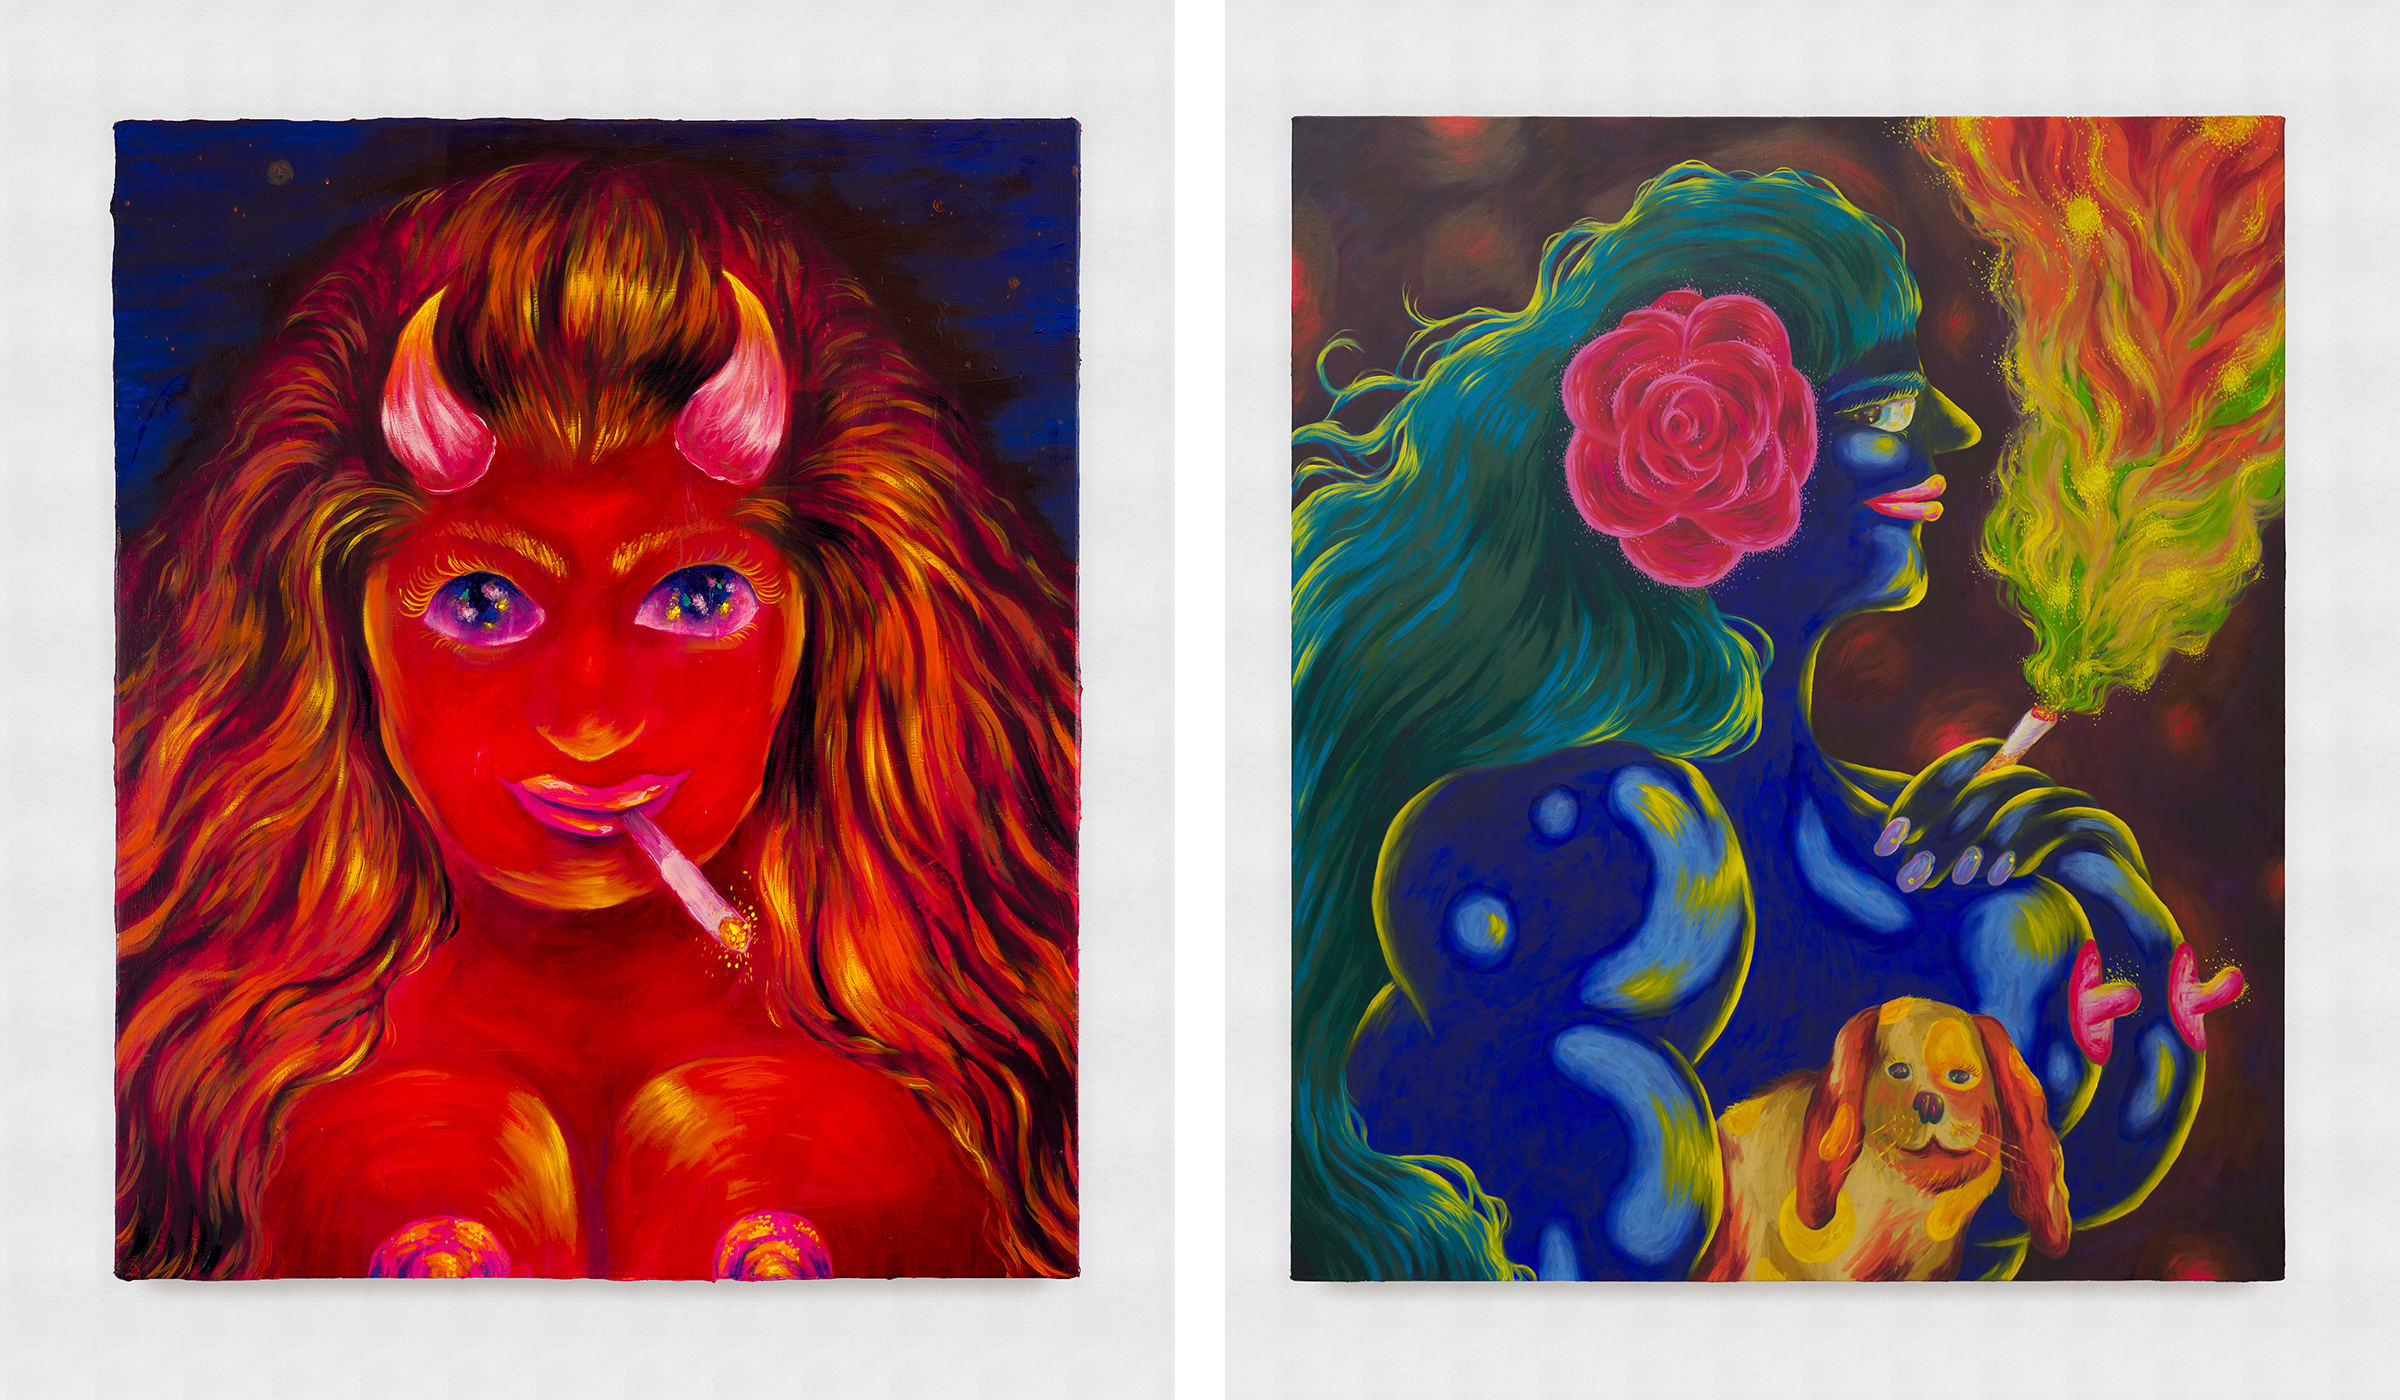 Works by Ana Benaroya. Left: The Devil May Care, 2023. Right: Eve, 2023. Courtesy the artist and Venus Over Manhattan.